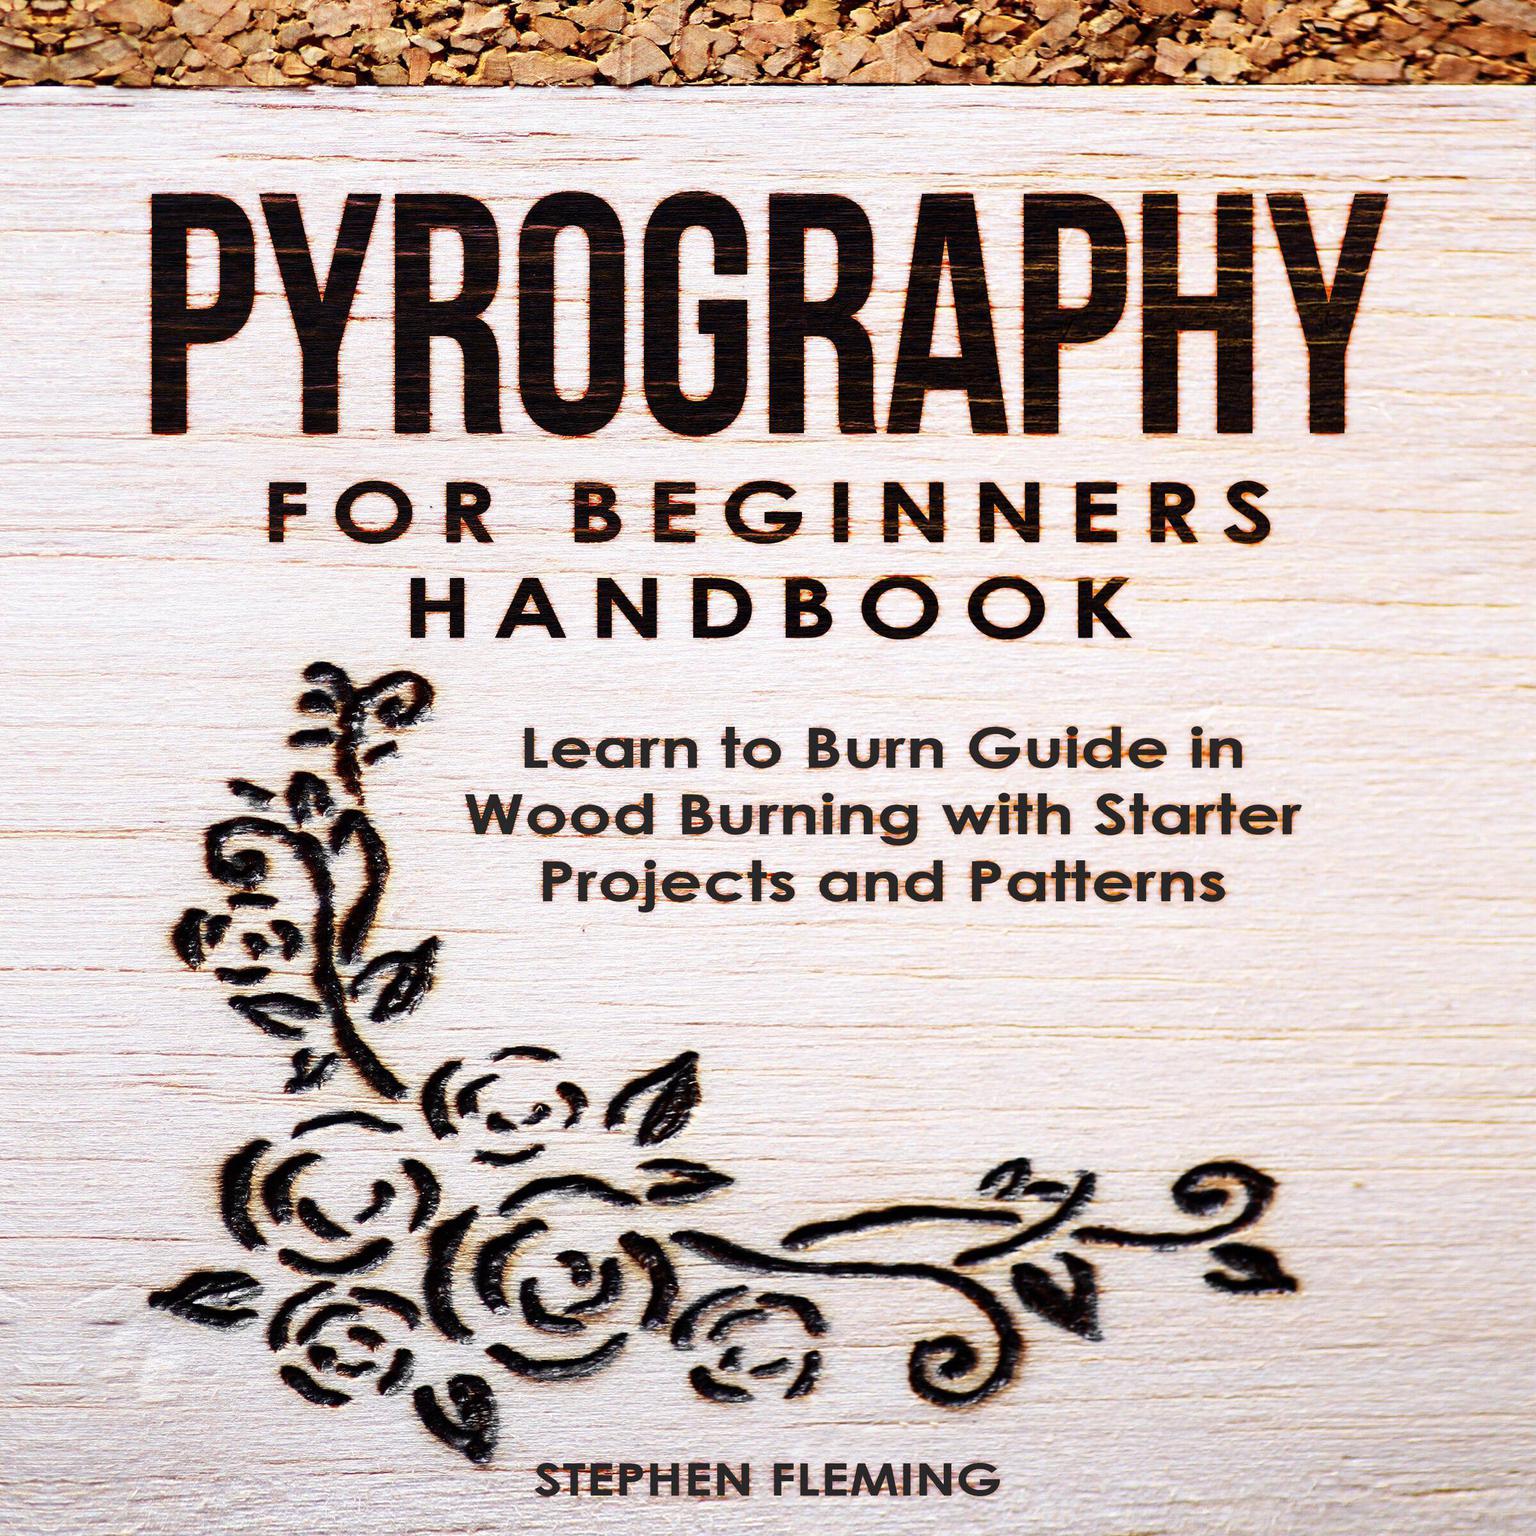 Pyrography for Beginners Handbook: Learn to Burn Guide in Wood Burning with Starter Projects and Patterns  Audiobook, by Stephen Fleming